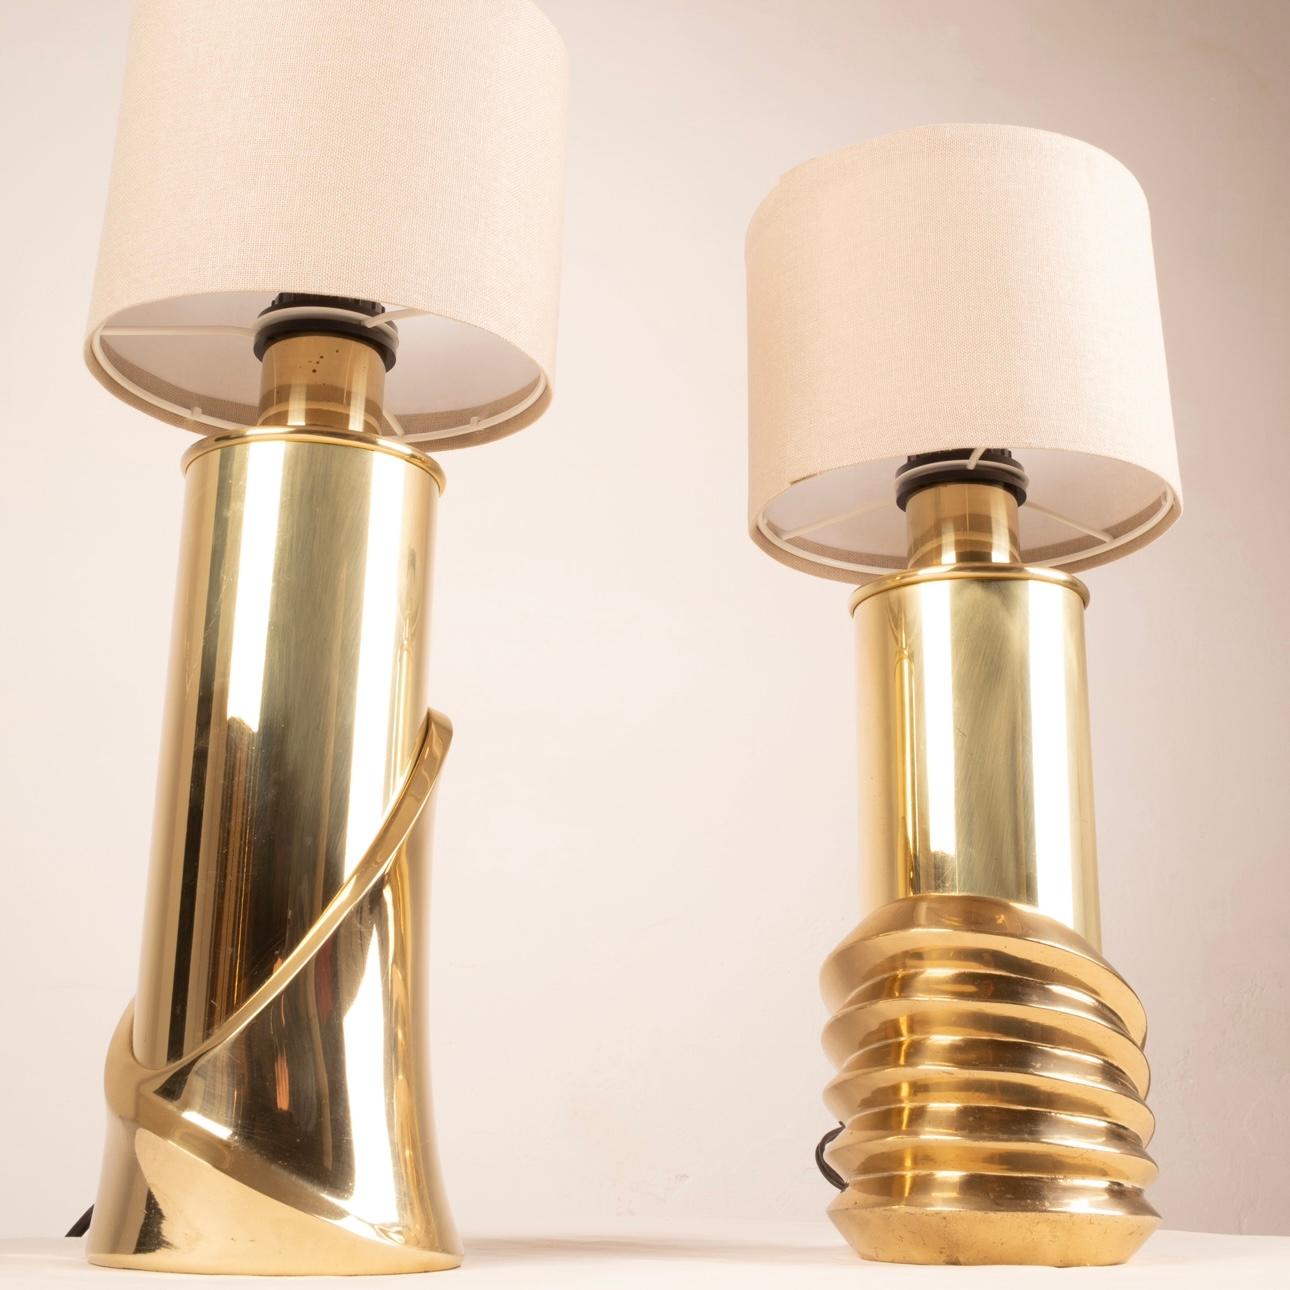 Elegant pair of brass table lamps signed by renowned designer Luciano Frigerio for the illustrious Frigerio brand of Desio in the 1970s.
These lamps, in excellent condition, feature two different designs but belong to the same series. 
Discover the